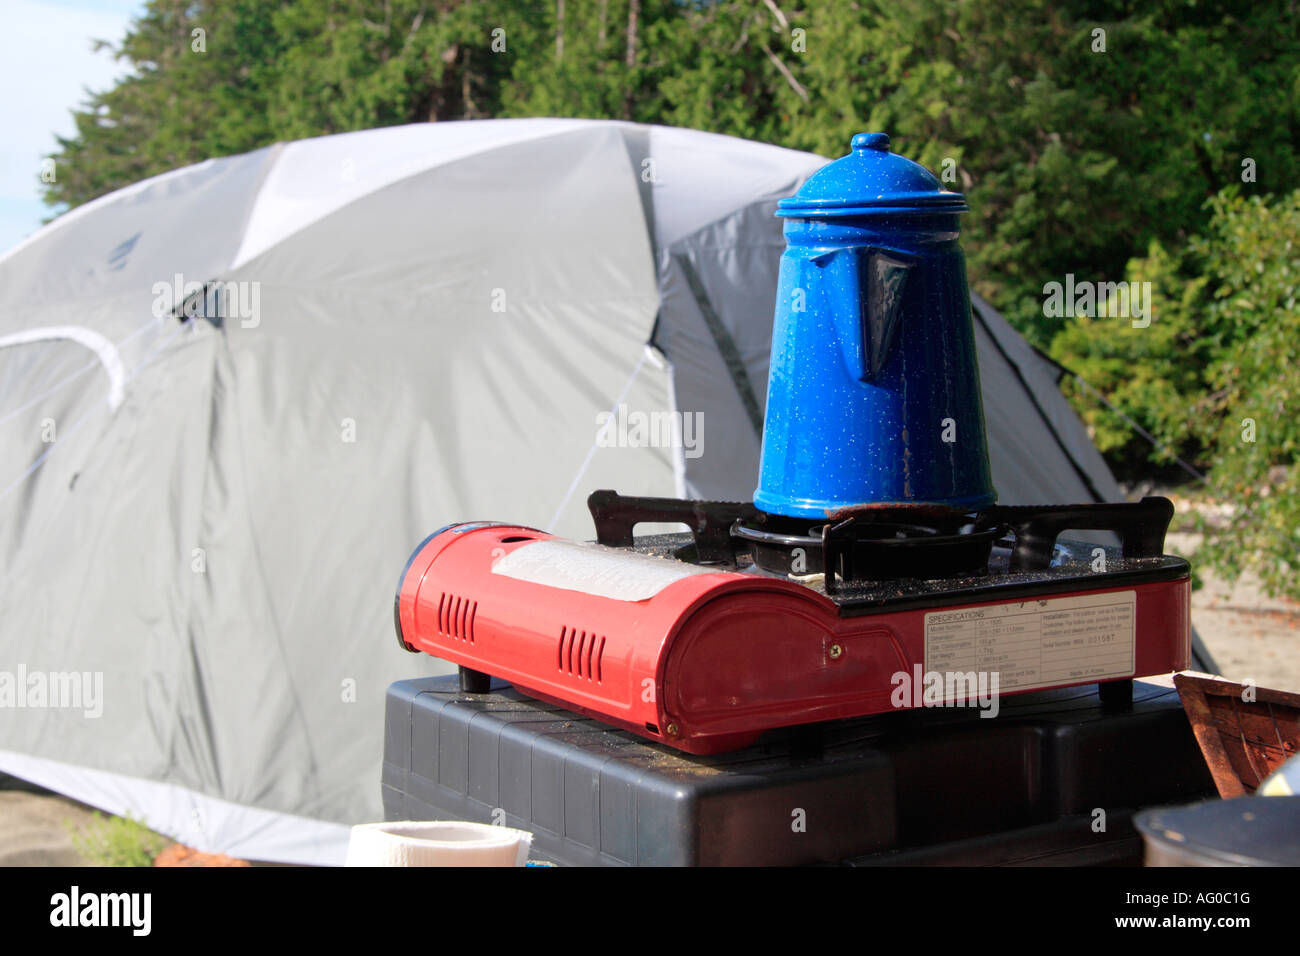 kettle on portable stove camping on beach clayoquot sound Stock Photo